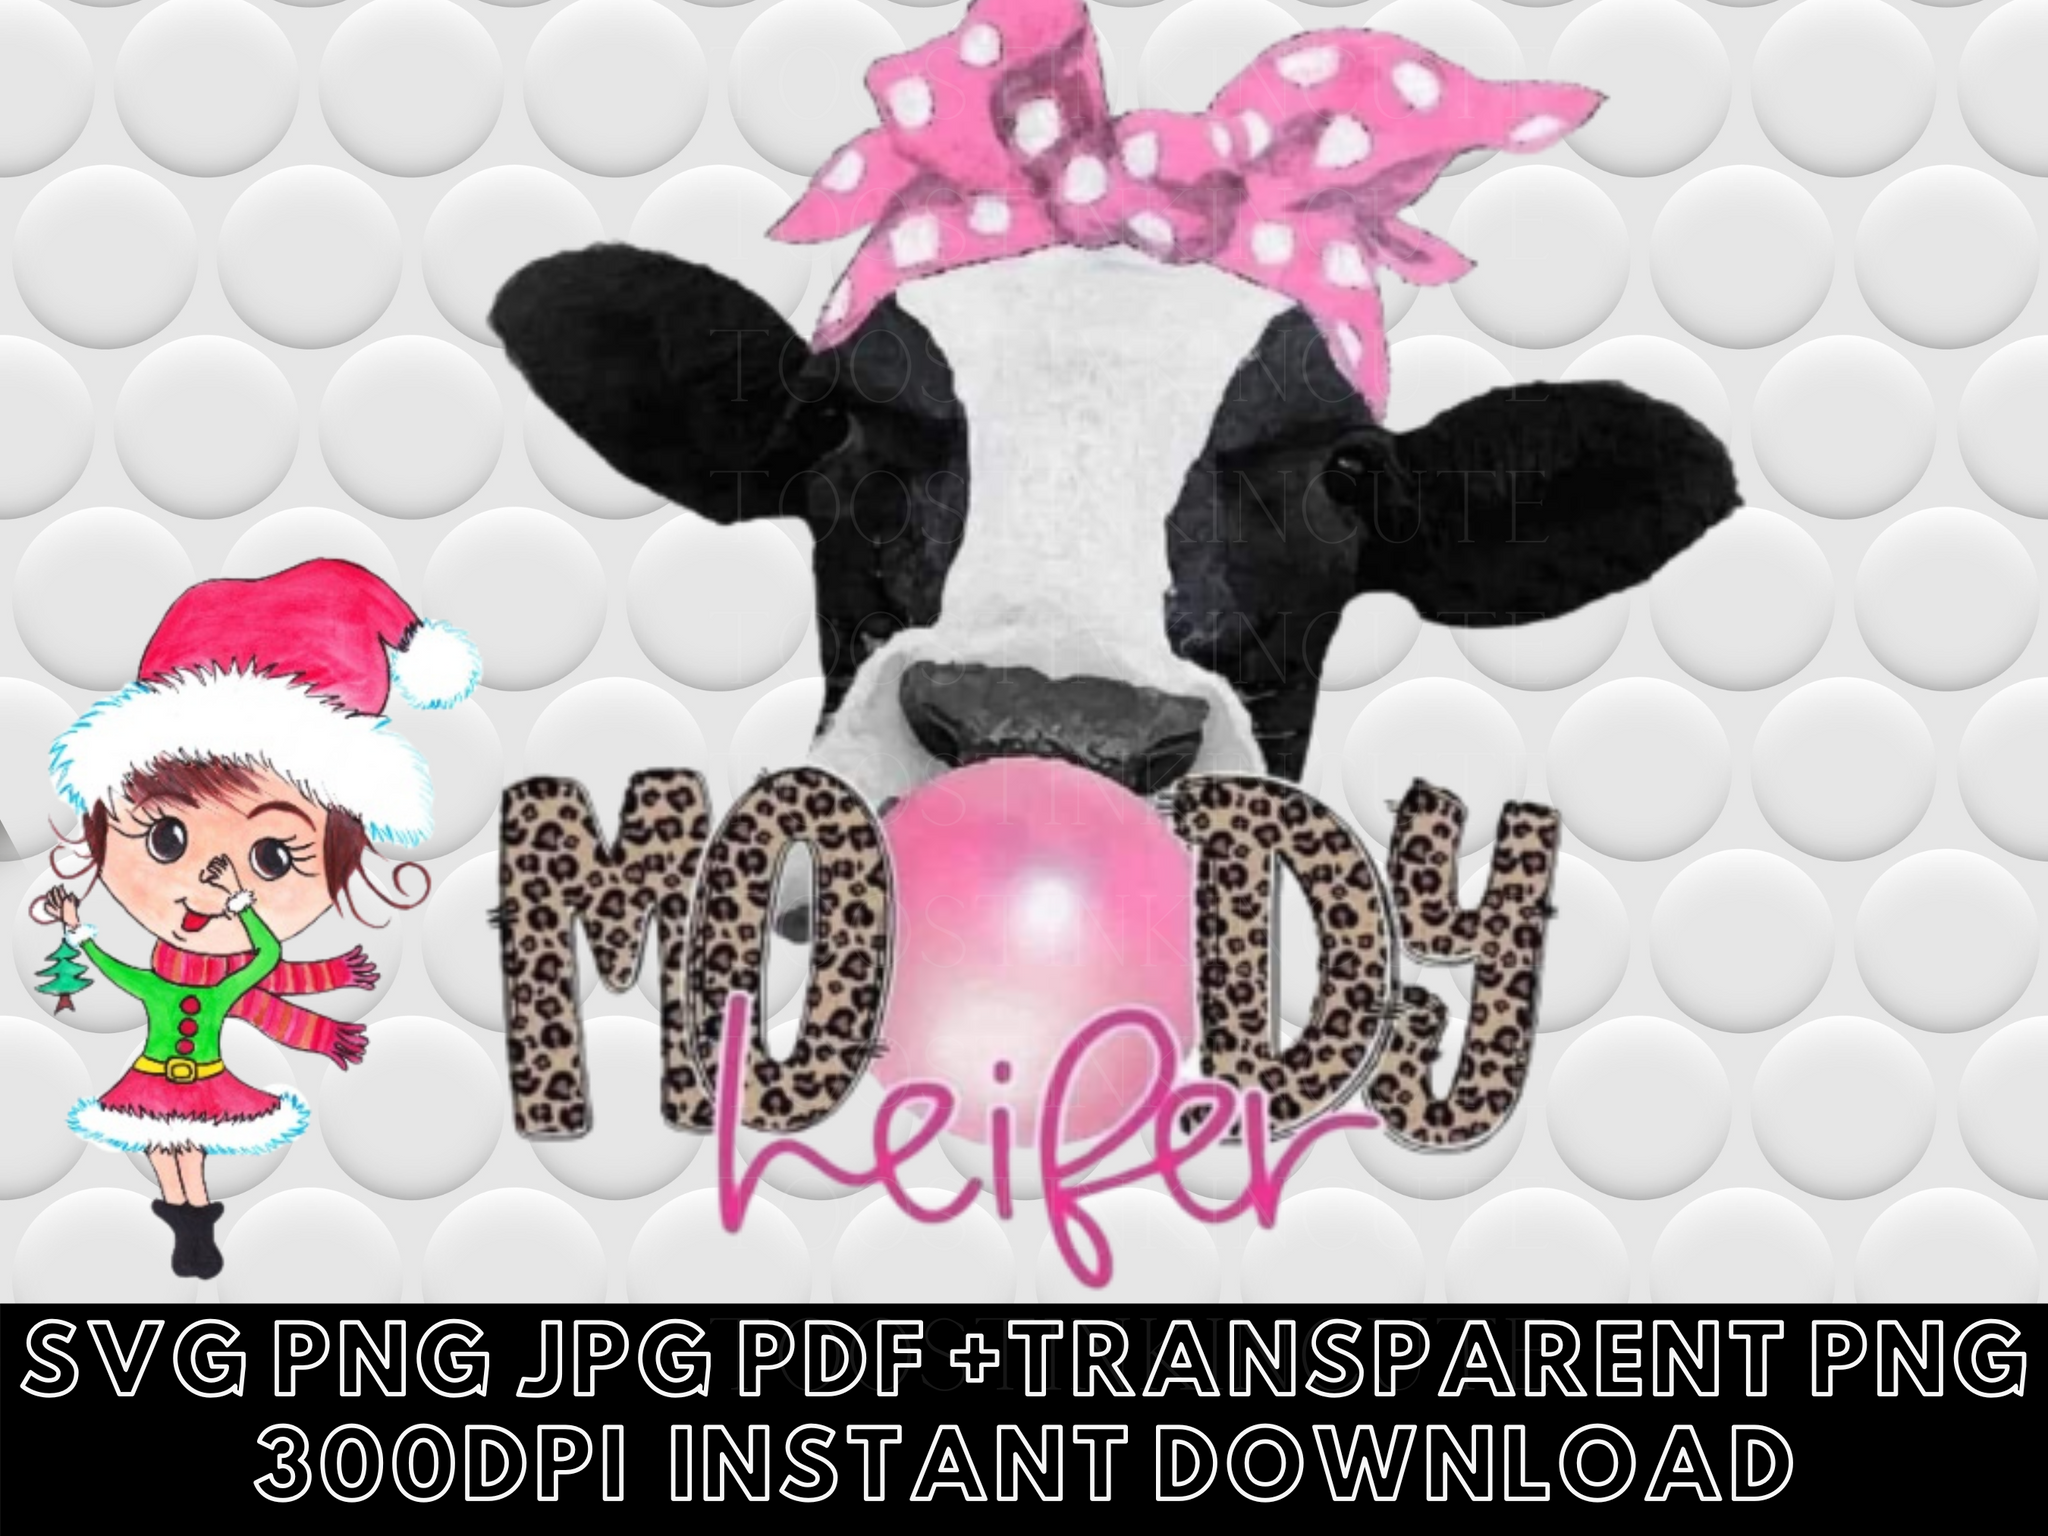 Moody Bubblegum Heifer Cow Digital Download|JPG PNG Instant download|Graphic File|Cow Png Sublimation dtf|Farmhouse Moody Cow Clipart Jpg